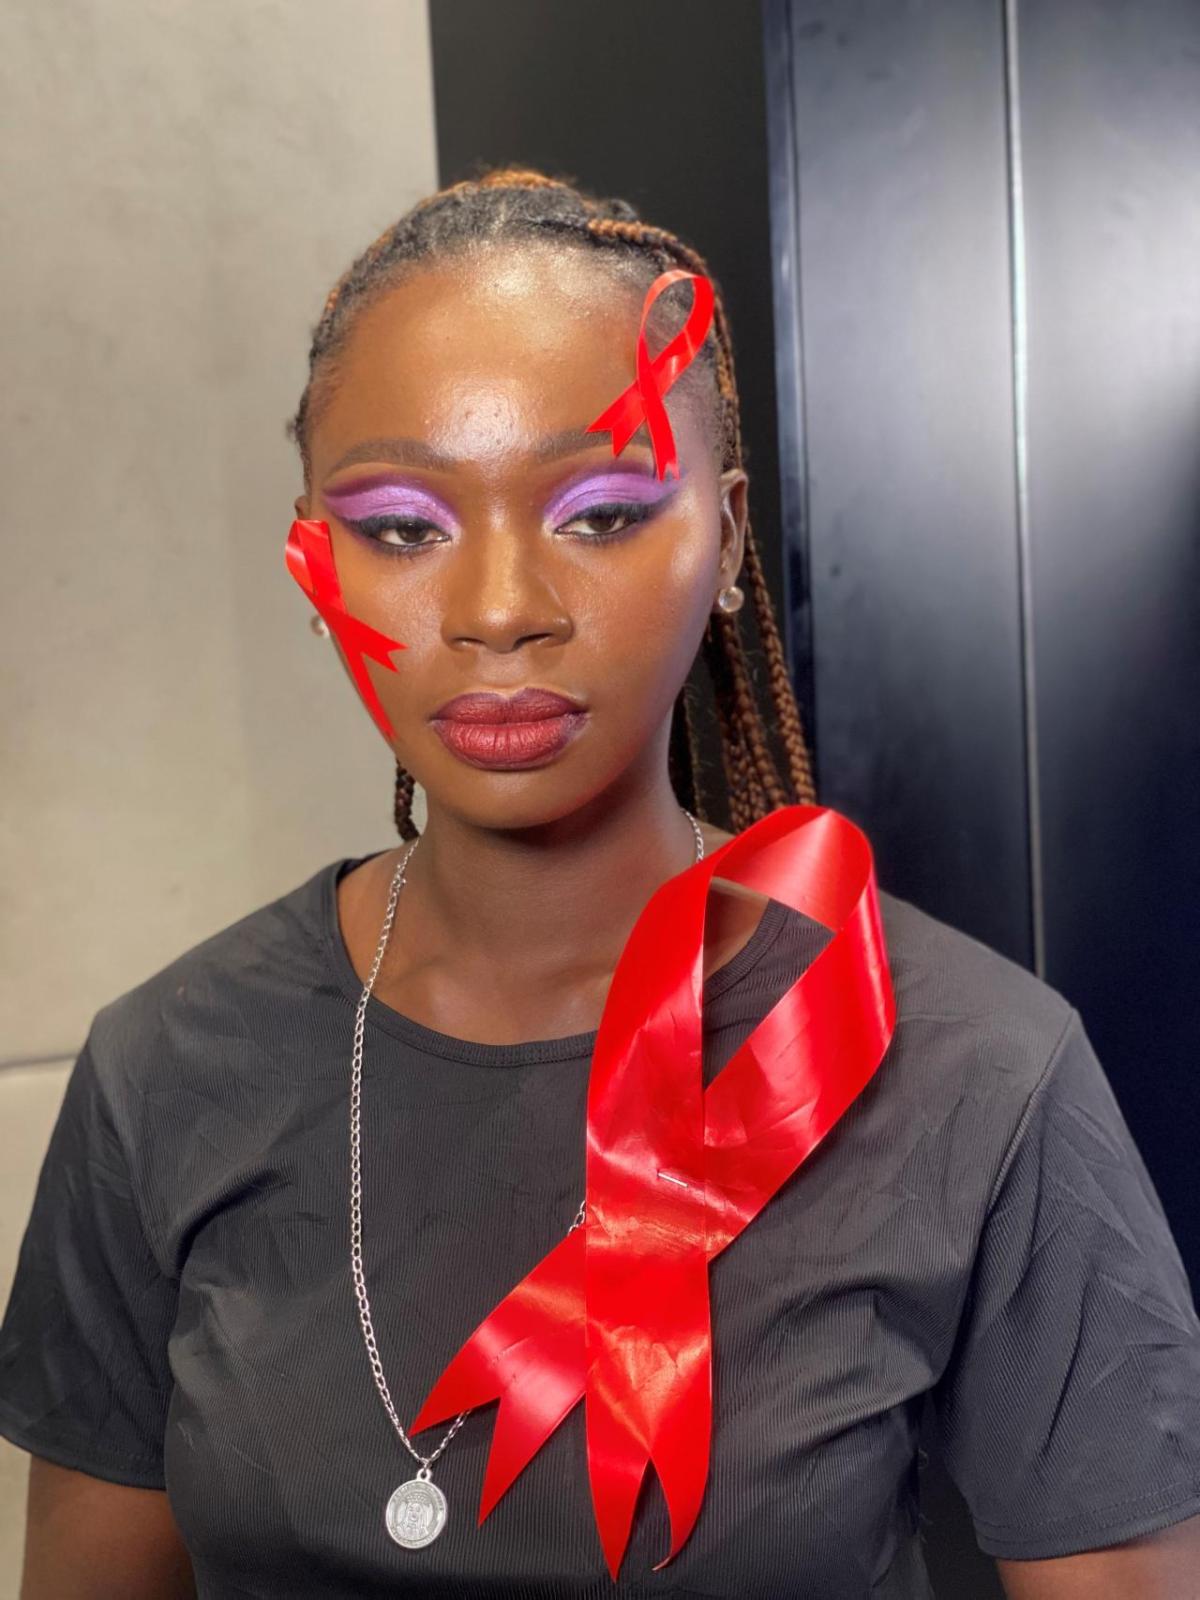 Person with red ribbons on their face and shirt